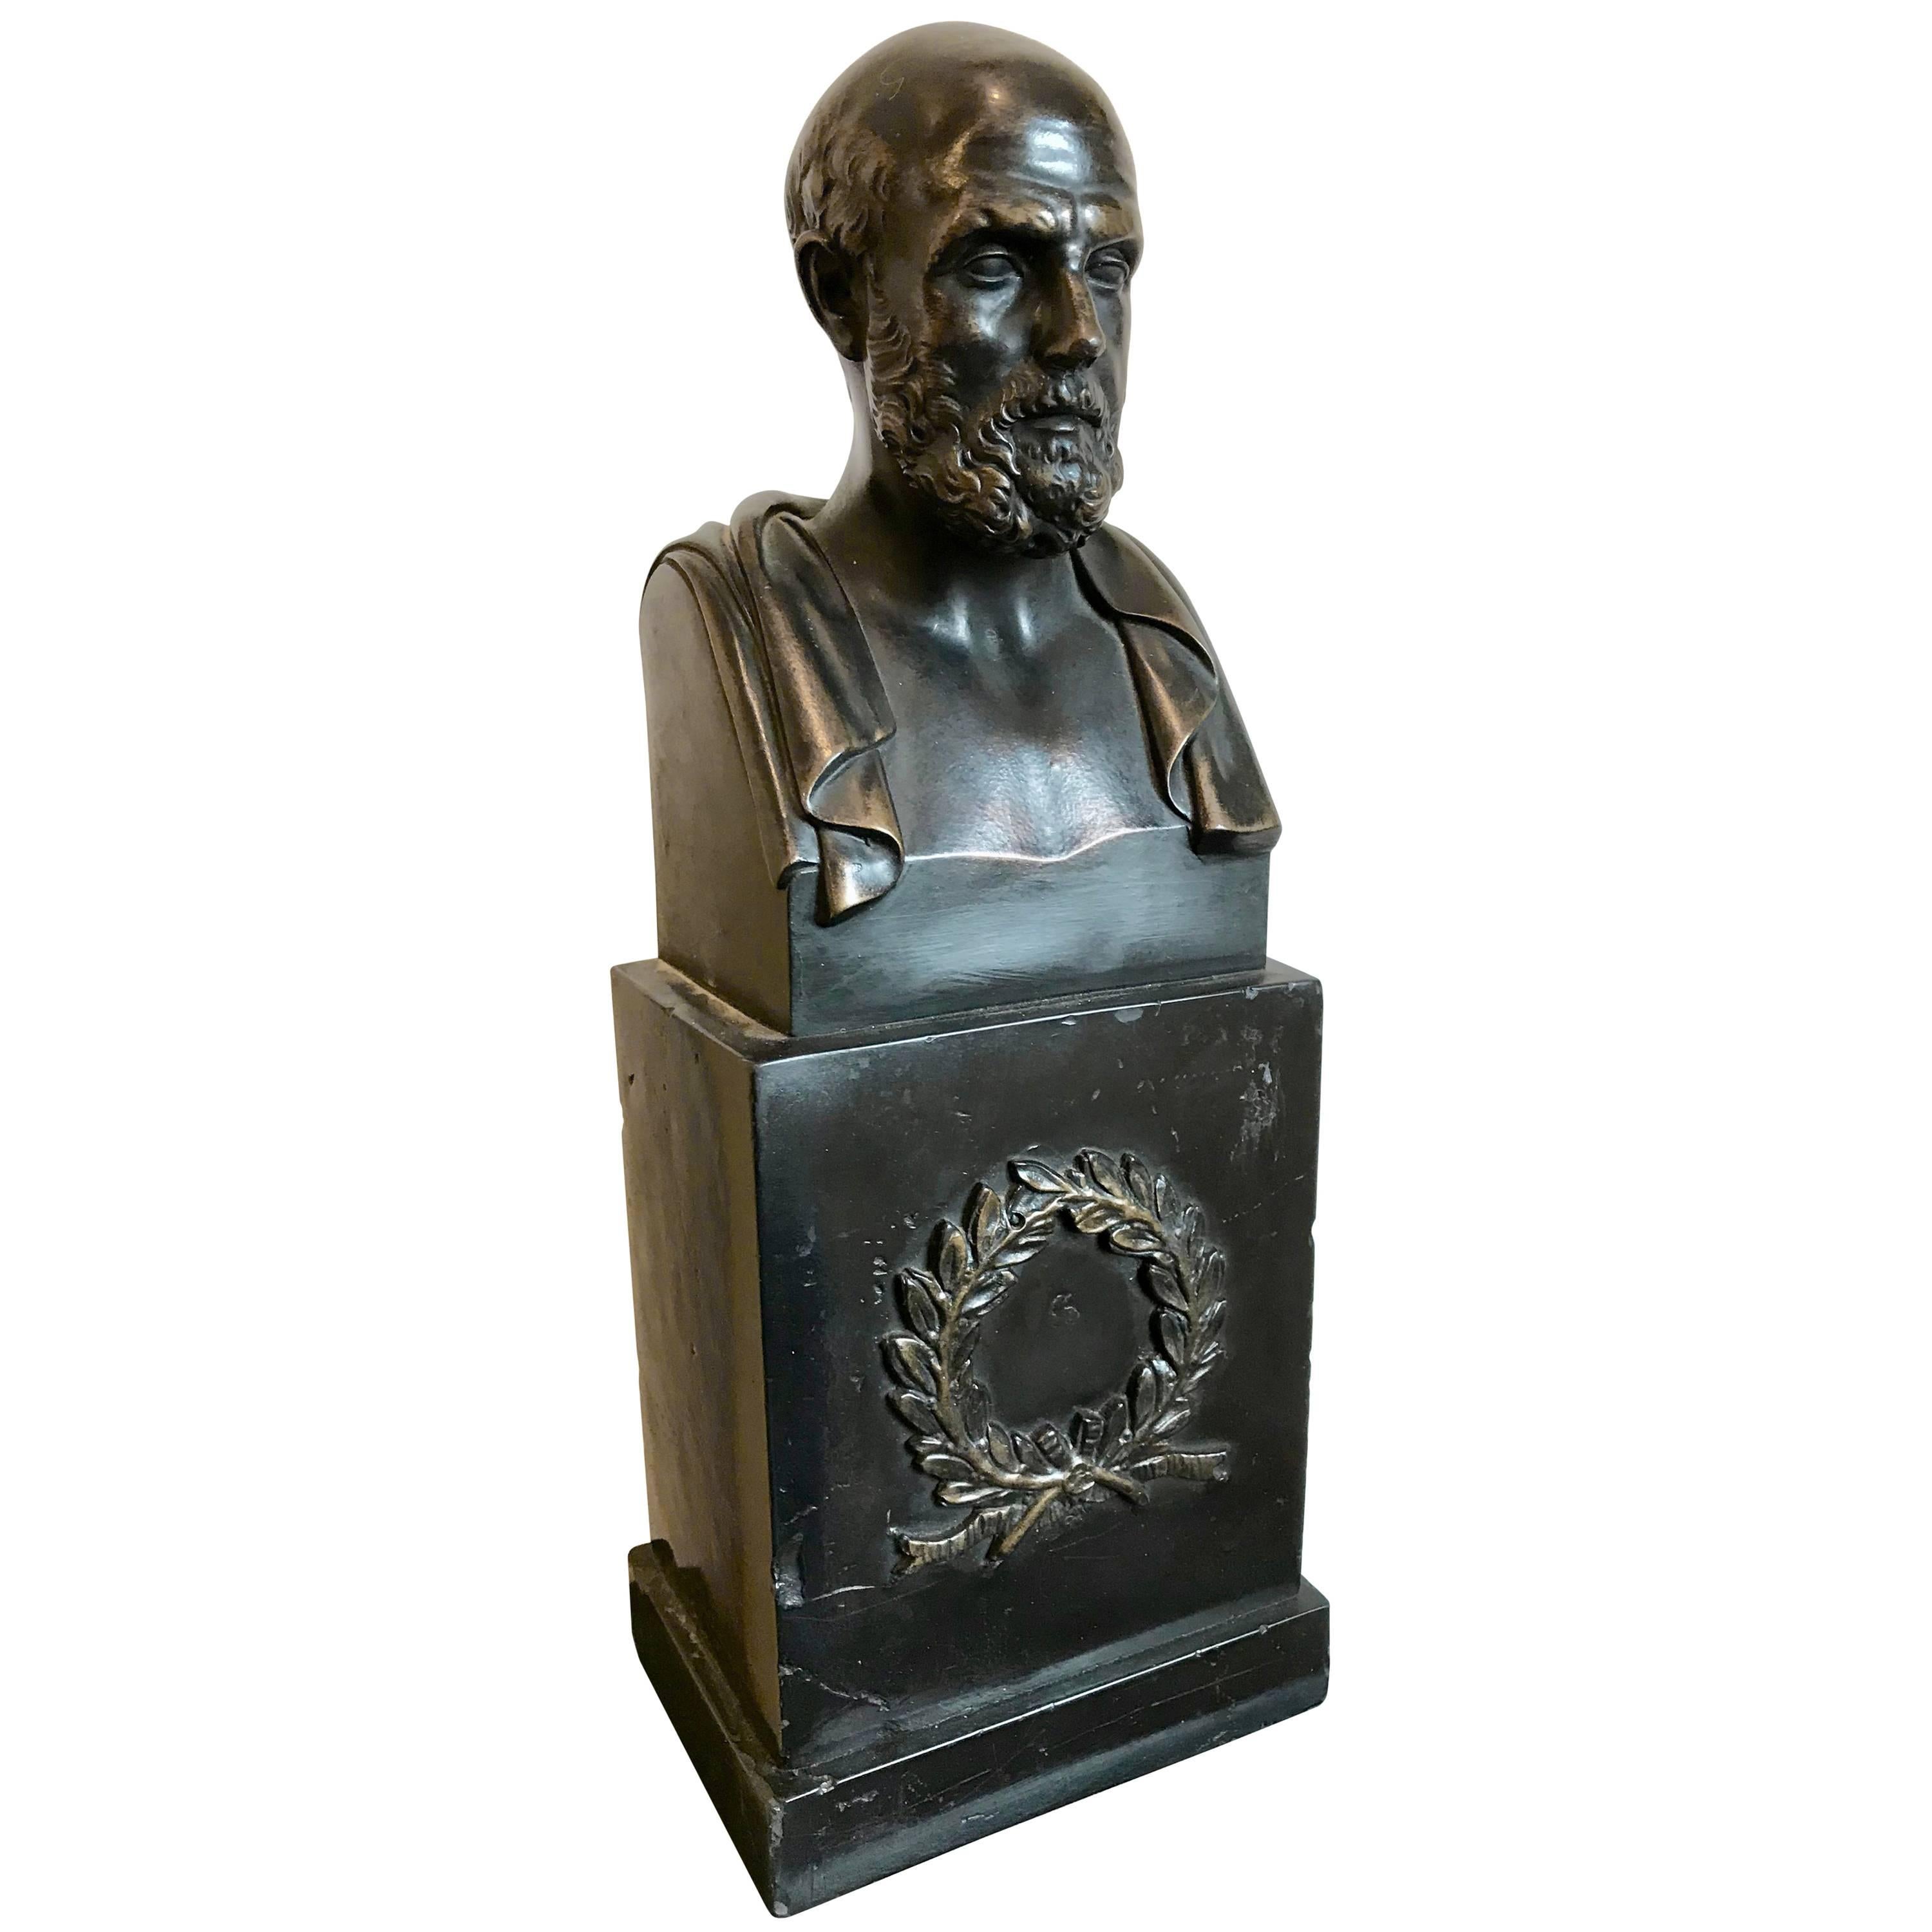 Bronze Bust of Hippocrates "The Father of Medicine"